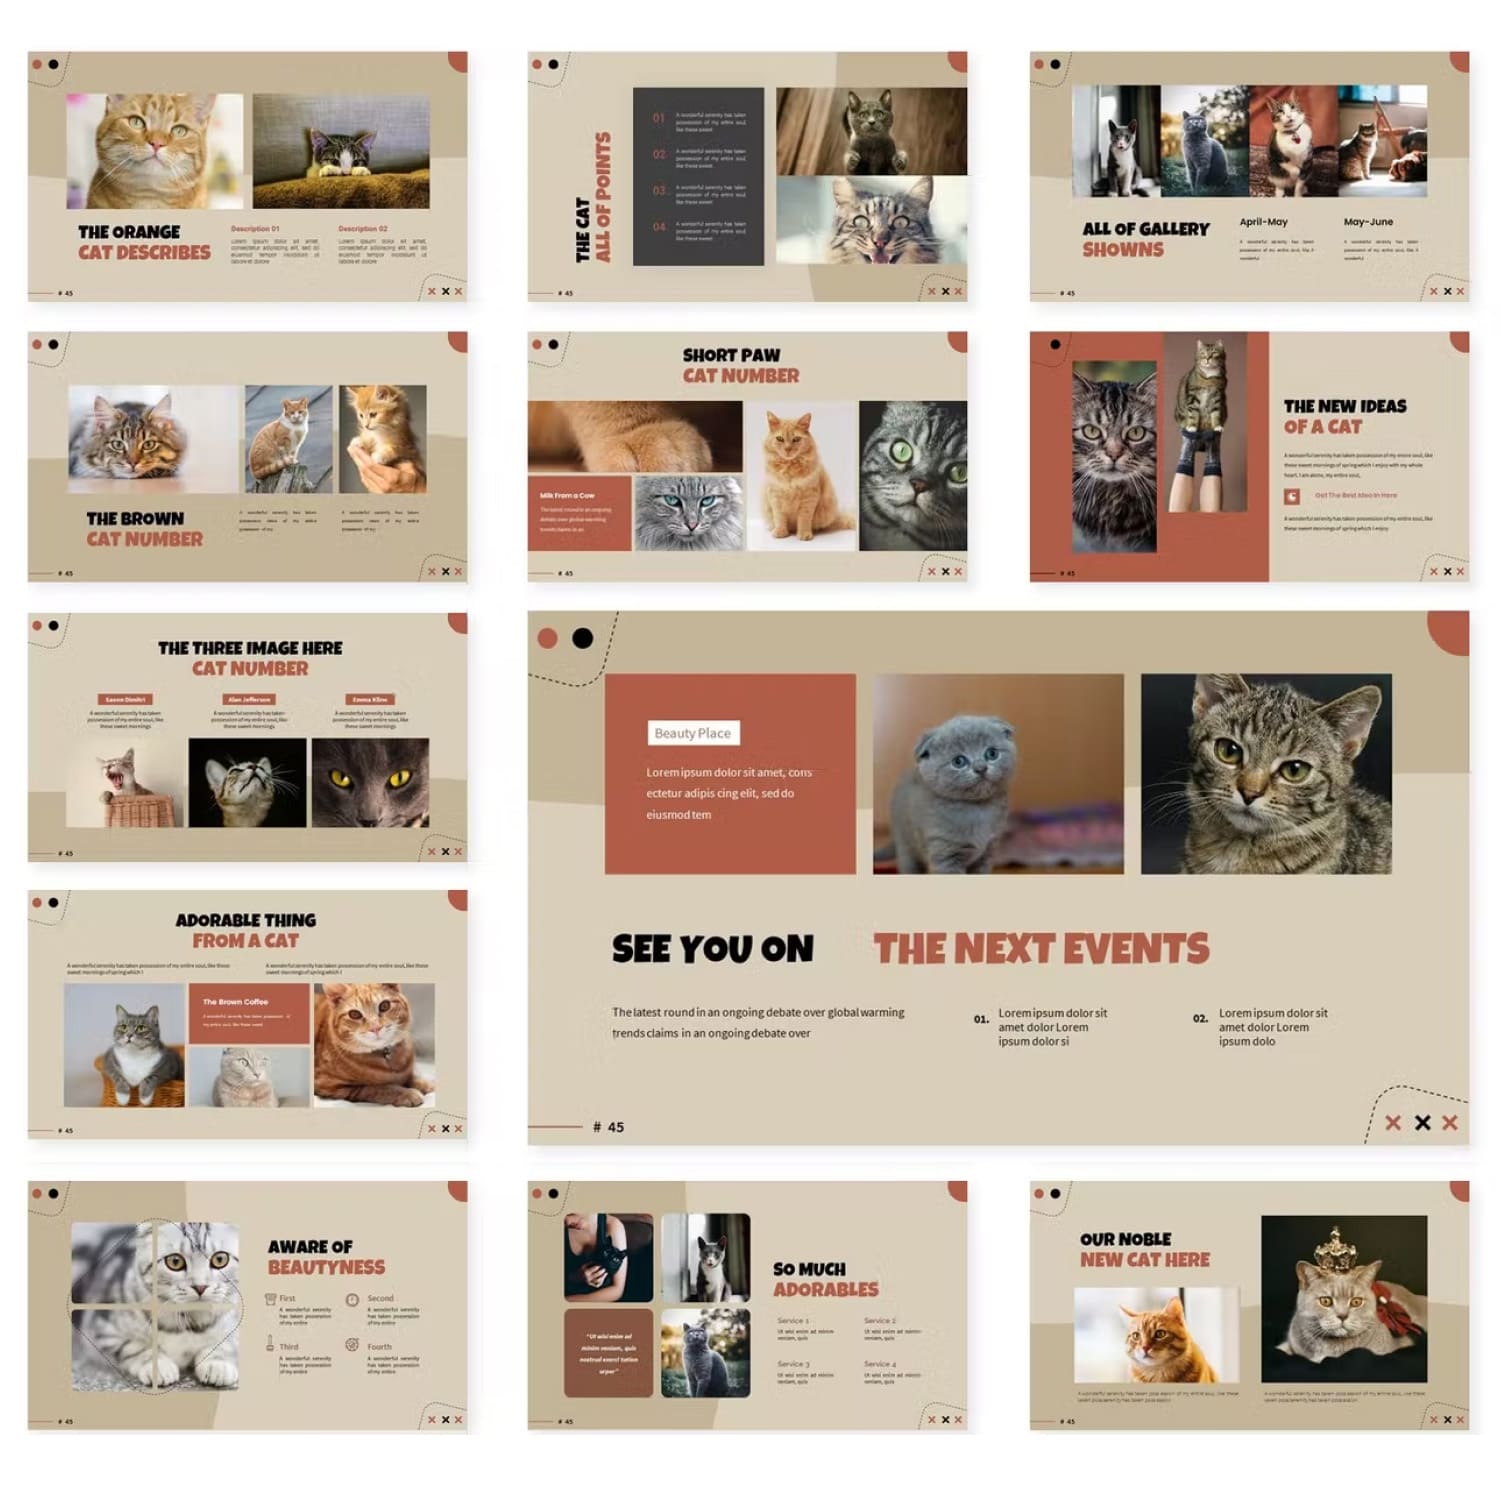 Cat adopted for happines powerpoint template from Vunira.